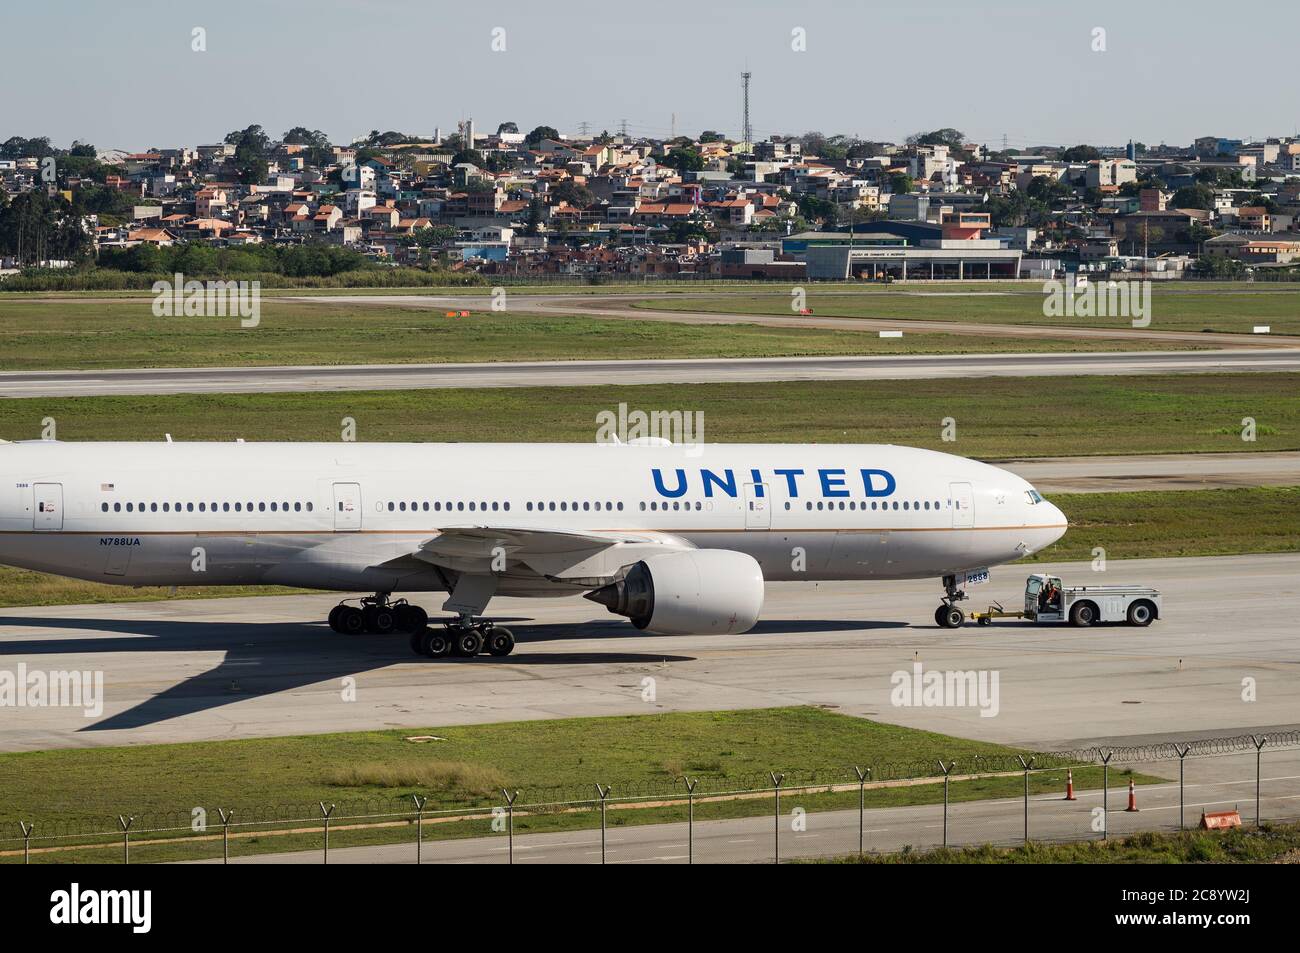 A Boeing 777-222ER (Reg N788UA) being pushed by a  pushback tractor on one of the taxiways of Sao Paulo/Guarulhos Intl. Airport before depart. Stock Photo